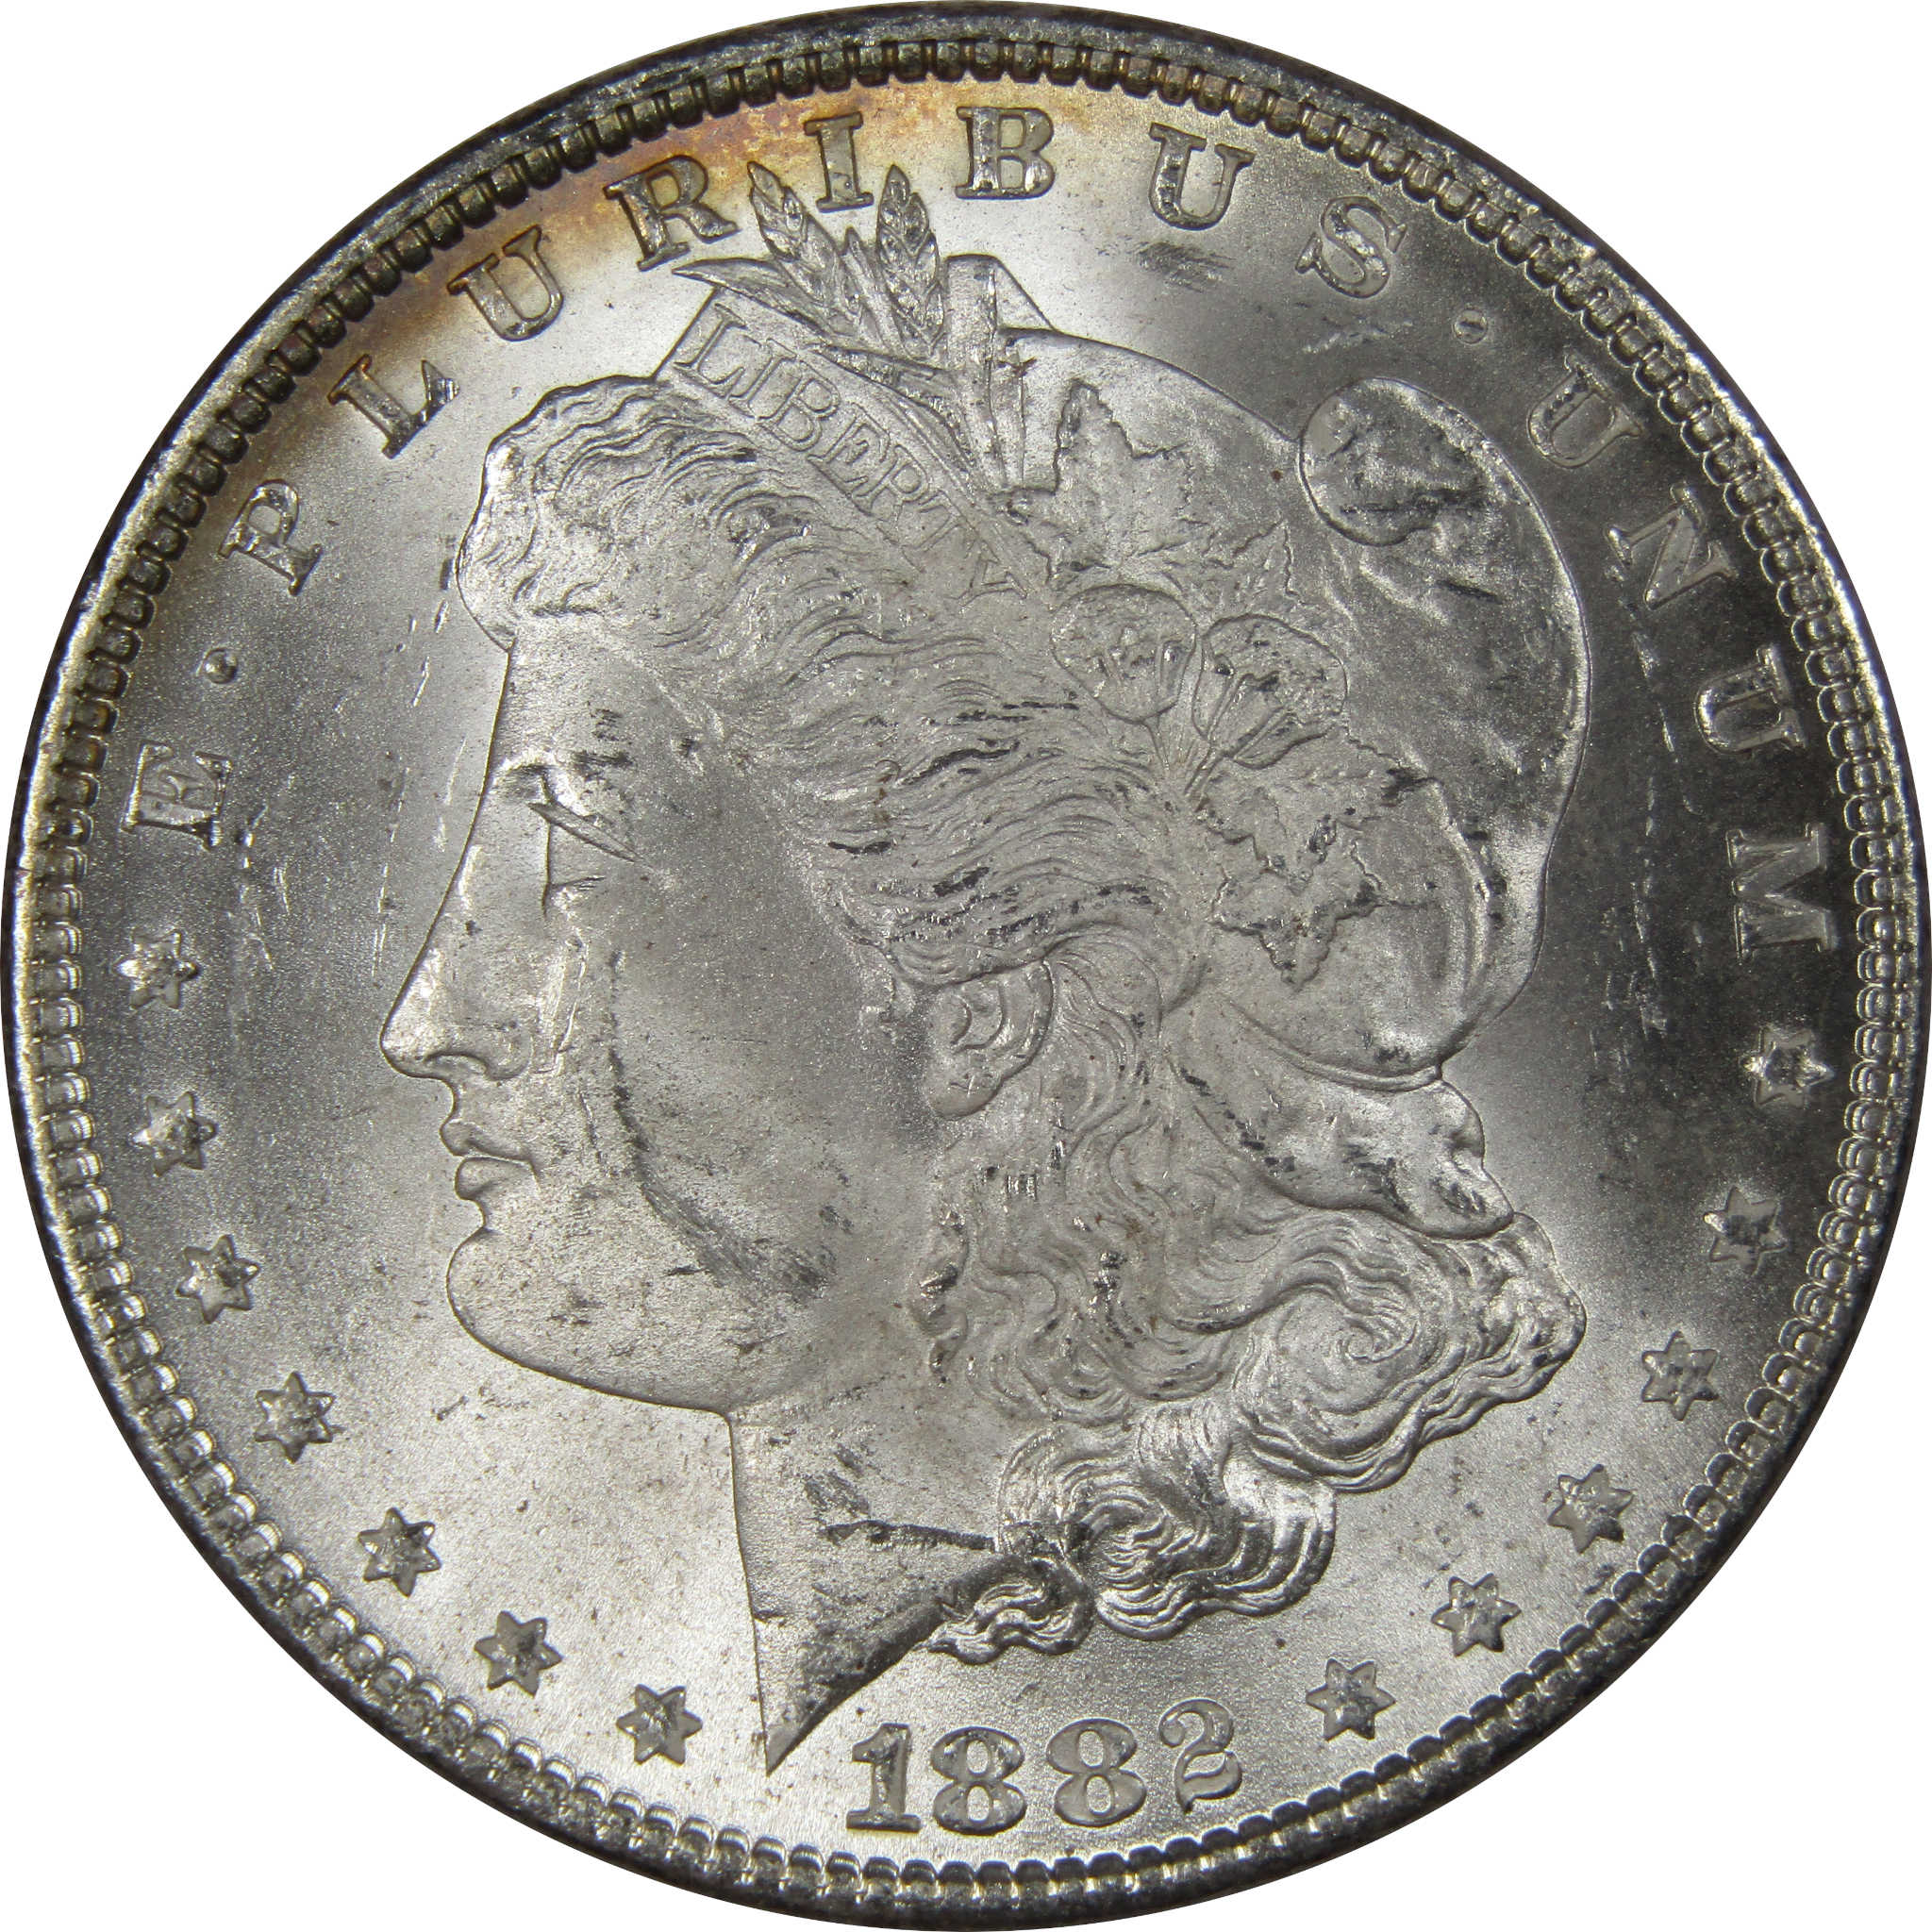 1882 Morgan Dollar BU Uncirculated Mint State 90% Silver SKU:IPC9651 - Morgan coin - Morgan silver dollar - Morgan silver dollar for sale - Profile Coins &amp; Collectibles